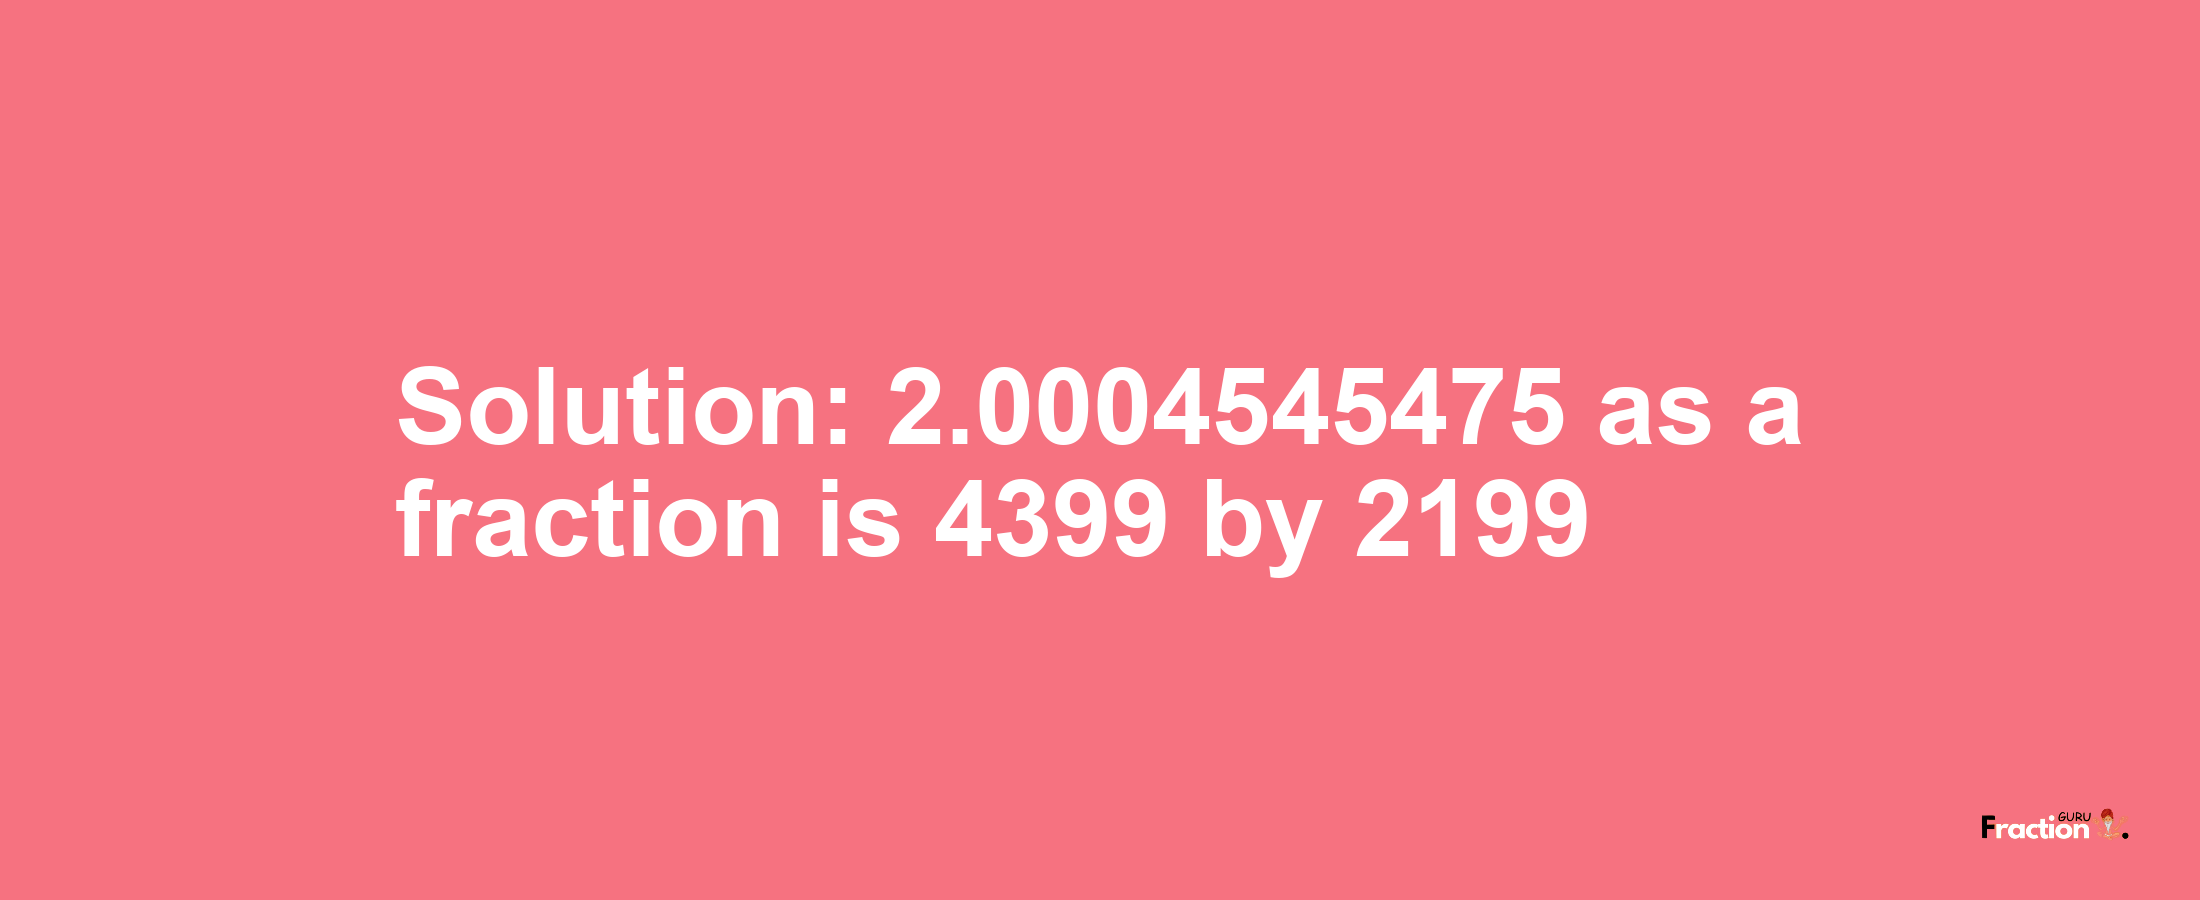 Solution:2.0004545475 as a fraction is 4399/2199